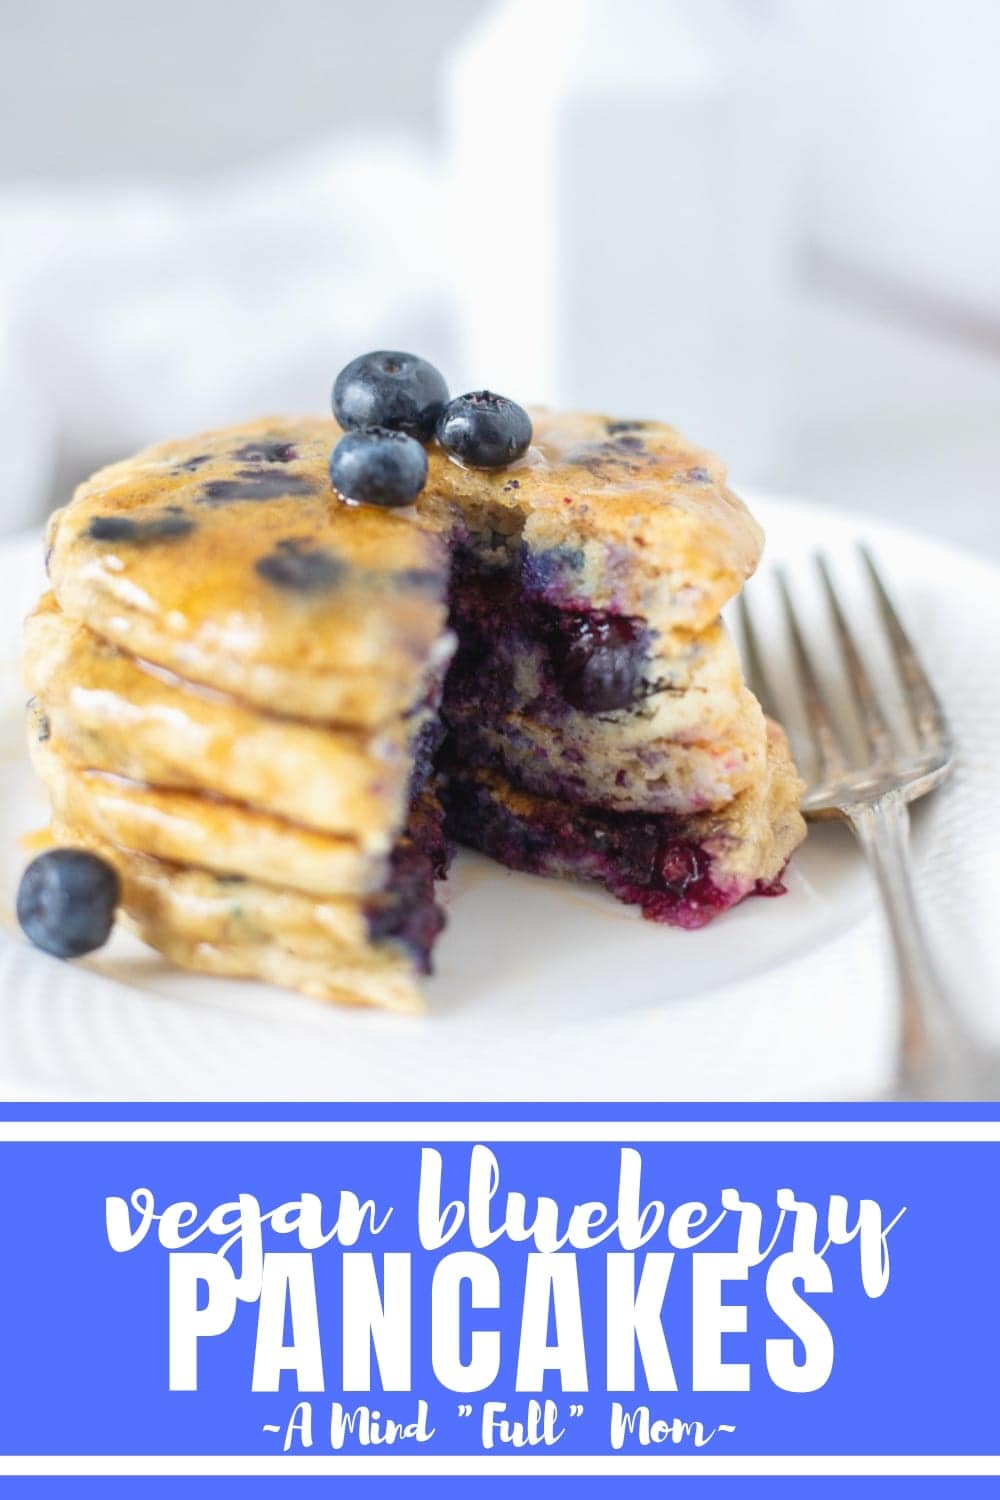 Fluffy Vegan Pancakes DO exist!! These Vegan Blueberry Pancakes are egg-free and dairy-free, yet light, tender, and incredibly fluffy!